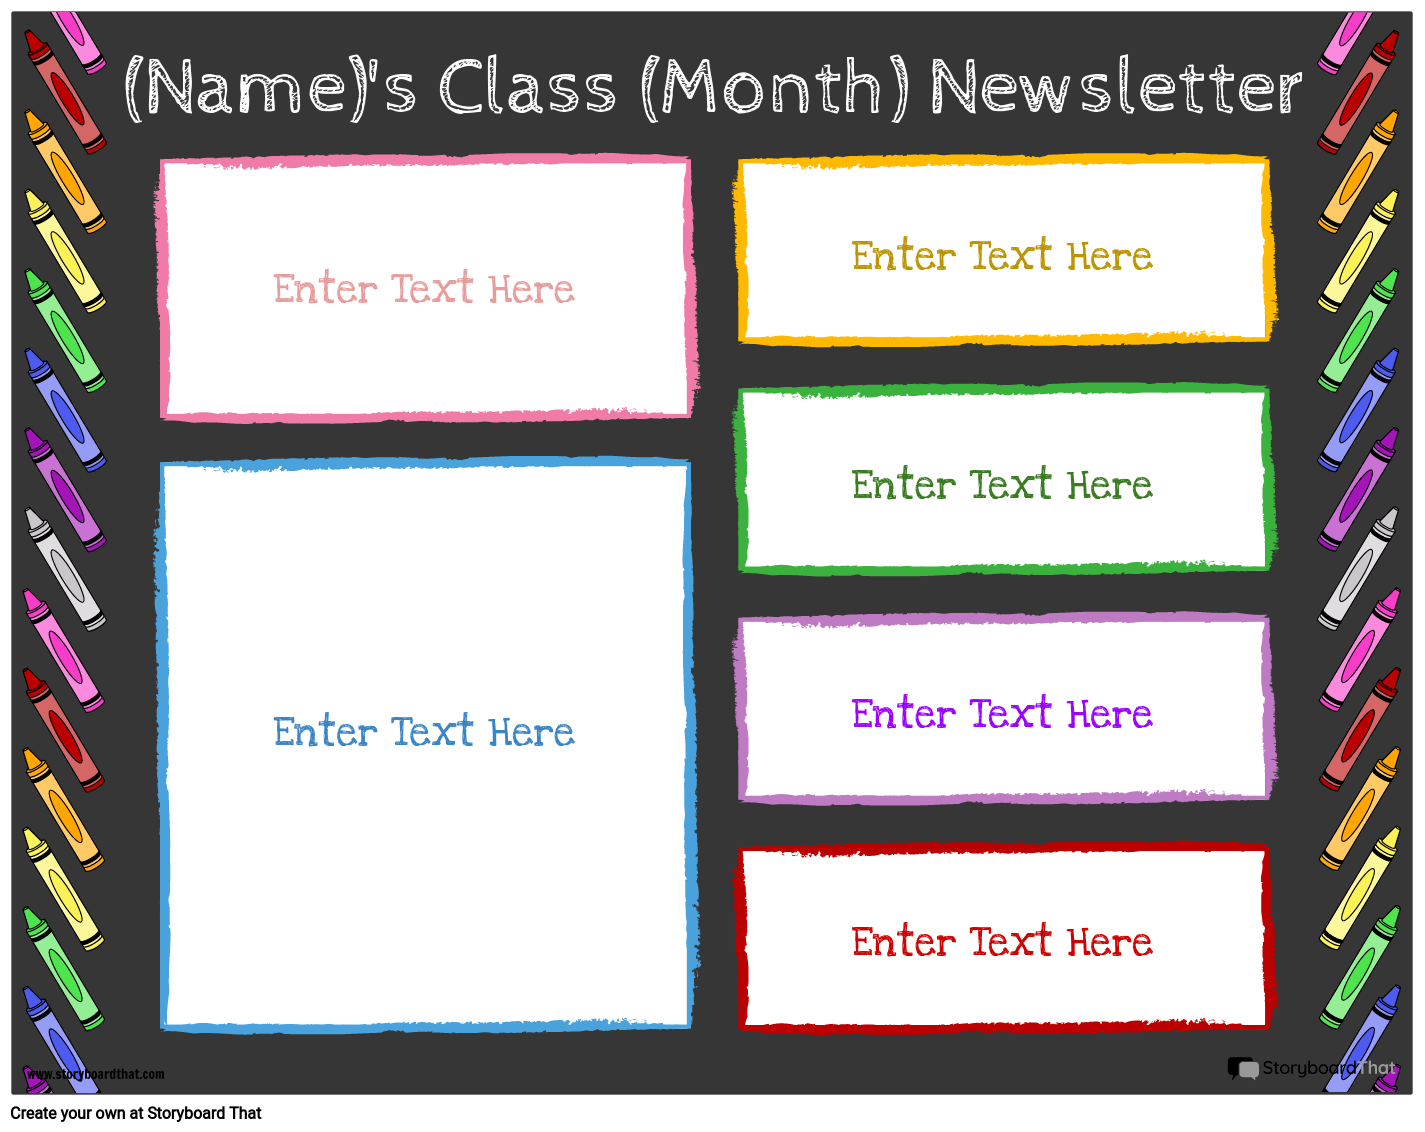 Newsletter Template with a Vibrant Blackboard